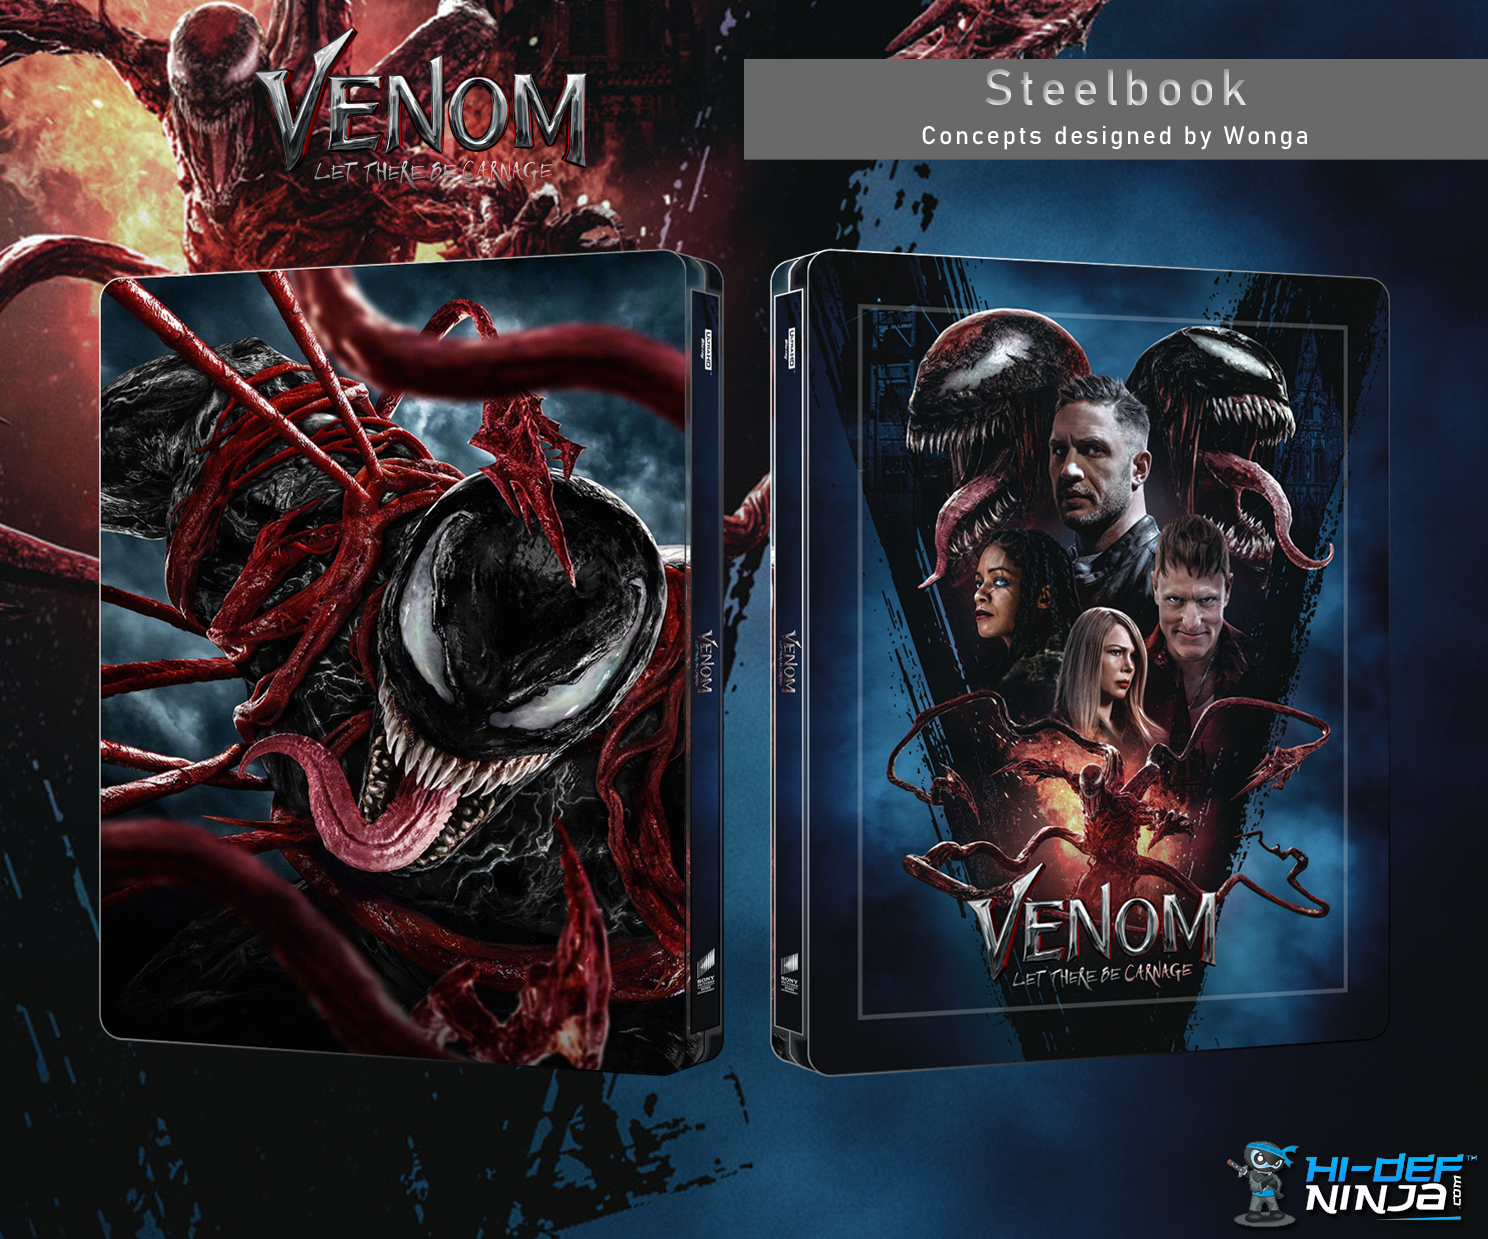 Venom Let There Be Carnage (Whole).jpg